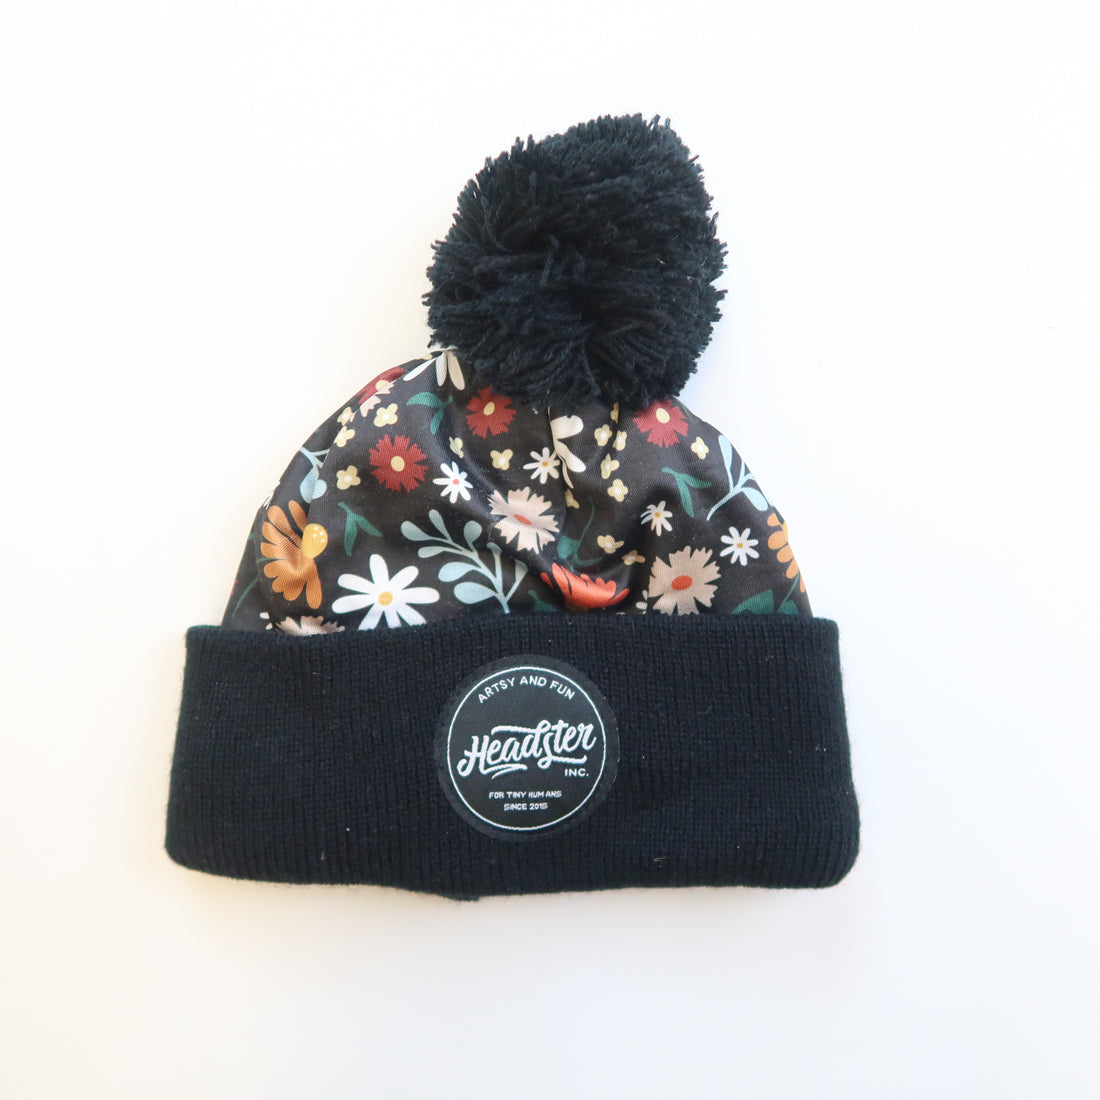 Headster - Hat (0-12M)